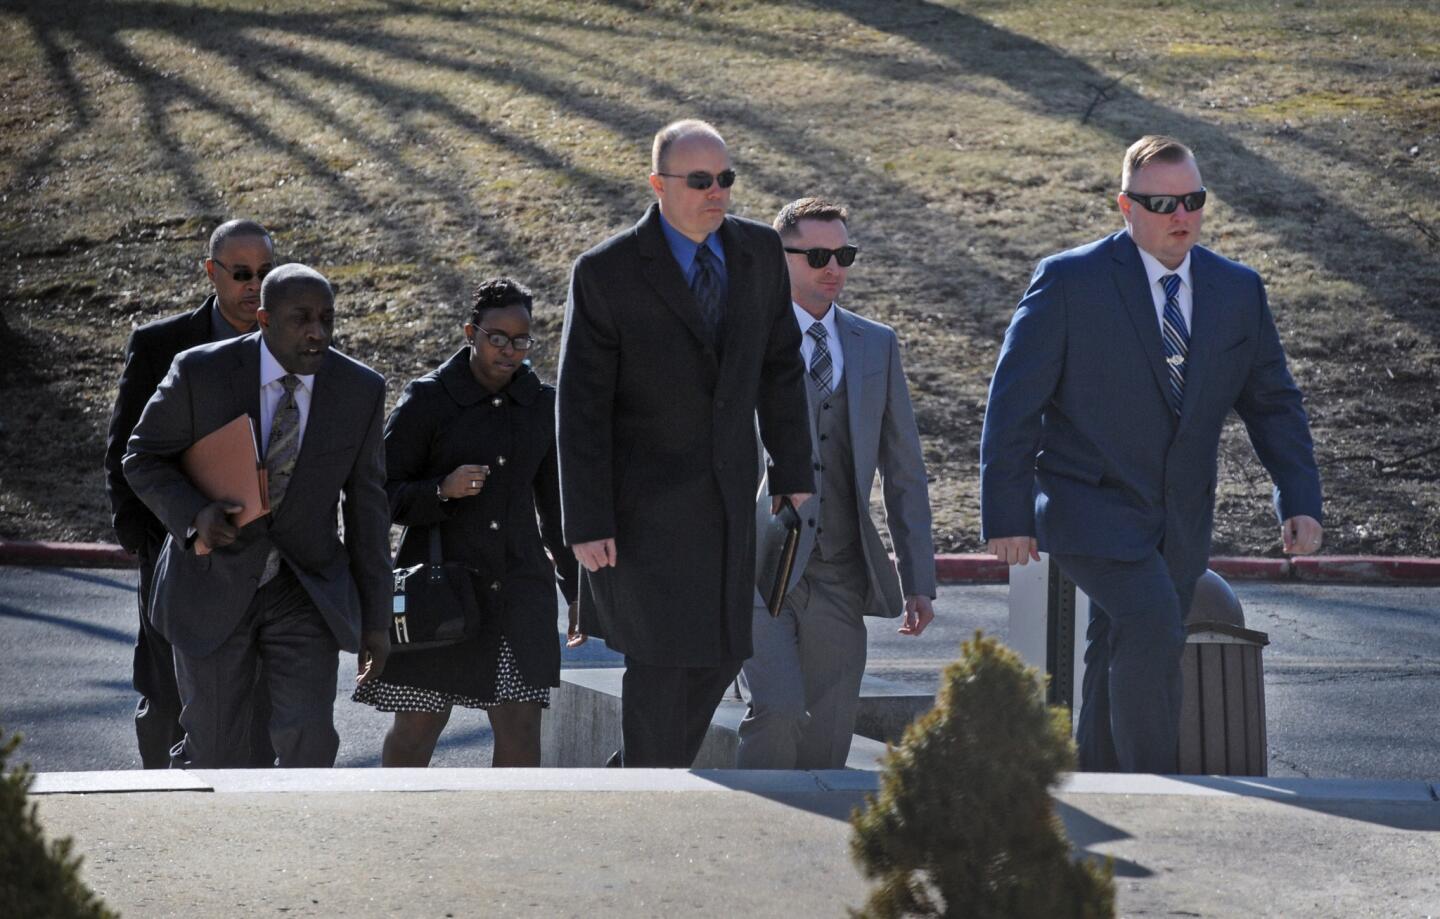 Baltimore police officers charged in the death of Freddie Gray, with their attorneys, arriving at the Robert C. Murphy Courts of Appeal for a hearing on Officer William Porter's appeal. From left to right: Ofc. Caesar Goodson Jr., attorney Matthew Fraling, Sgt. Alicia White, Lt. Brian Rice, Ofc. Edward Nero and Ofc. Garrett Miller.